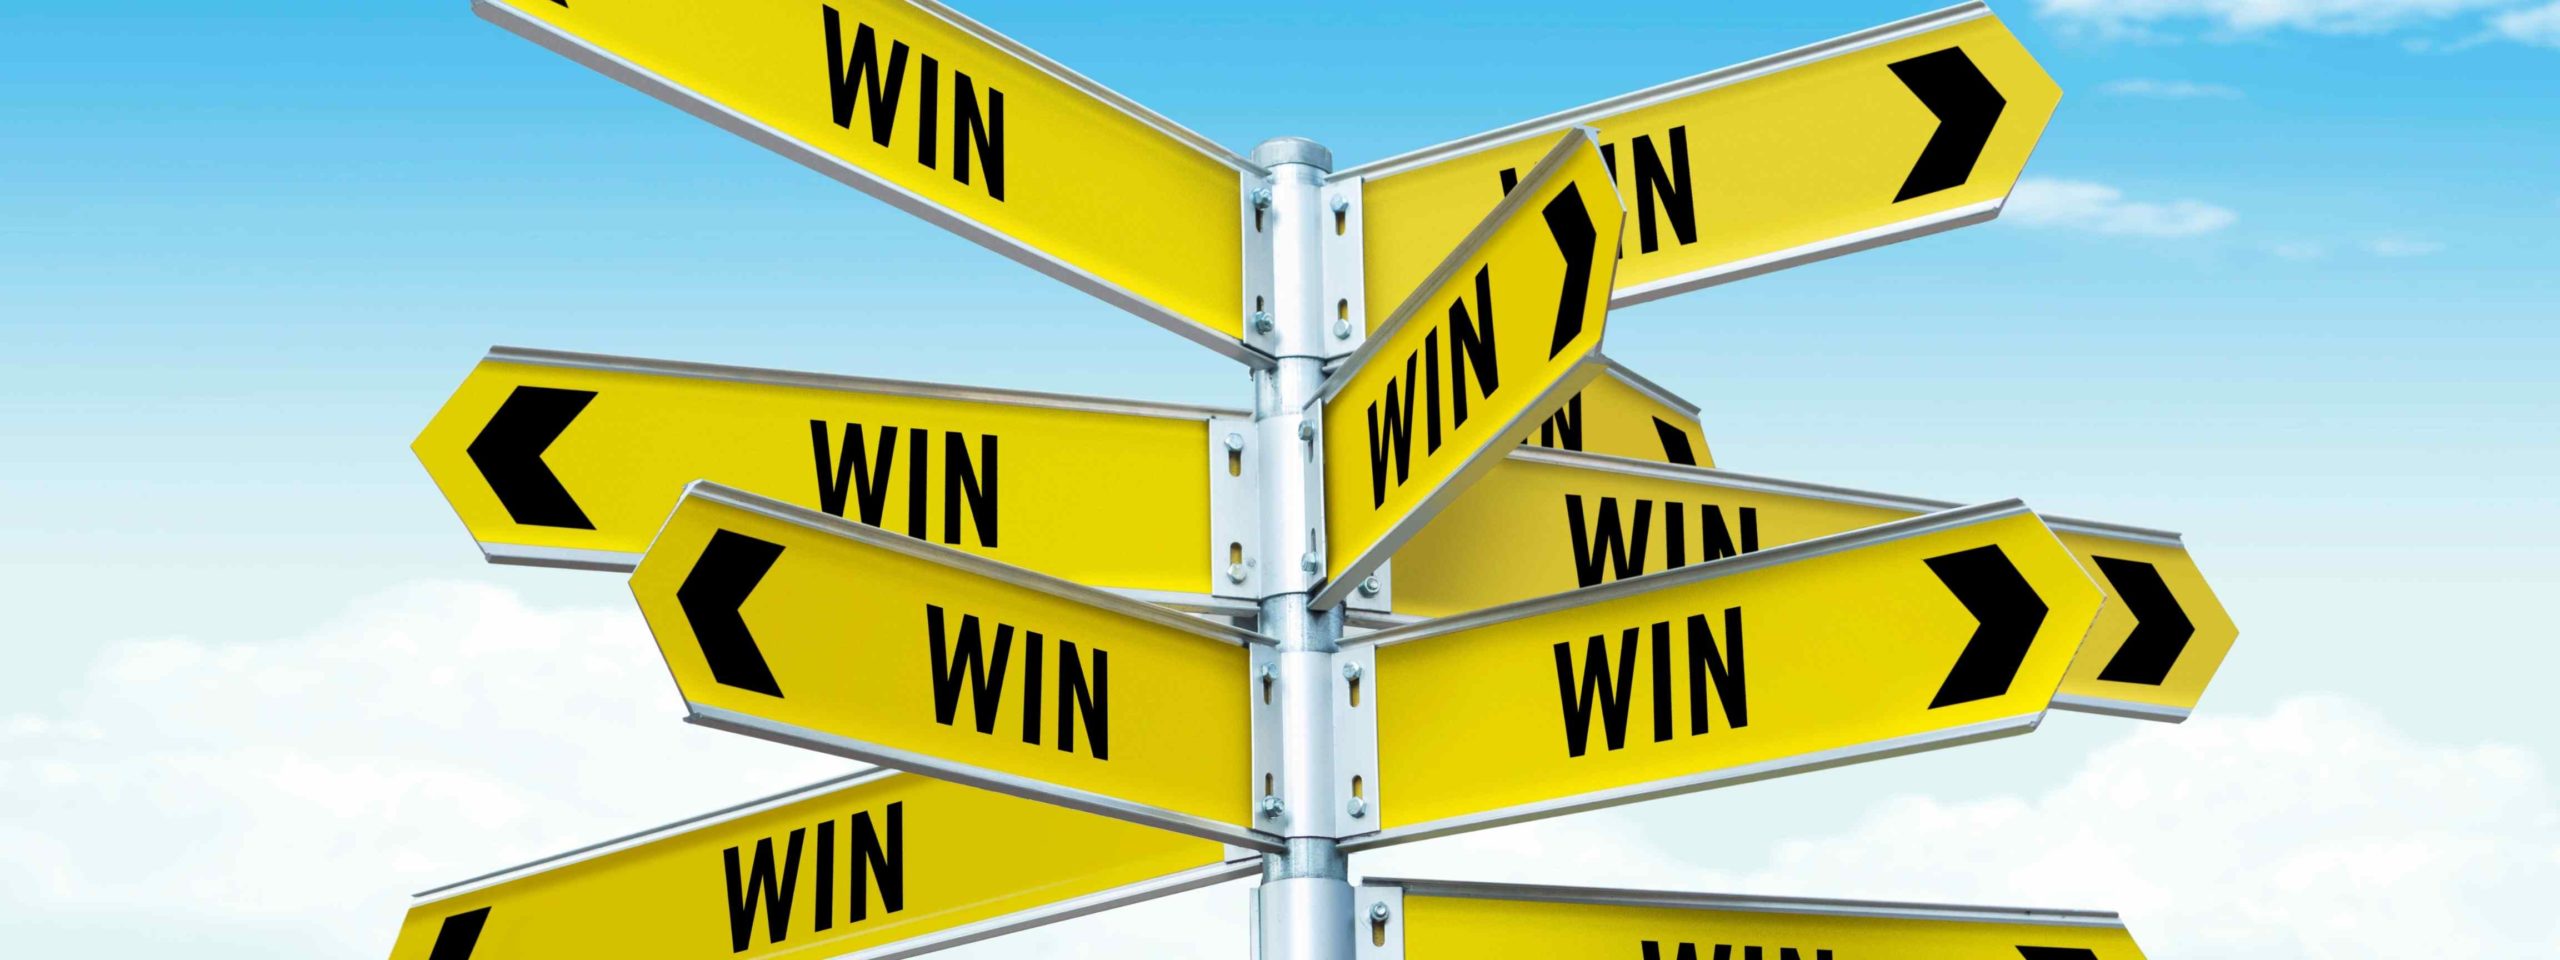 Street sign pointing in many directions that reads Win